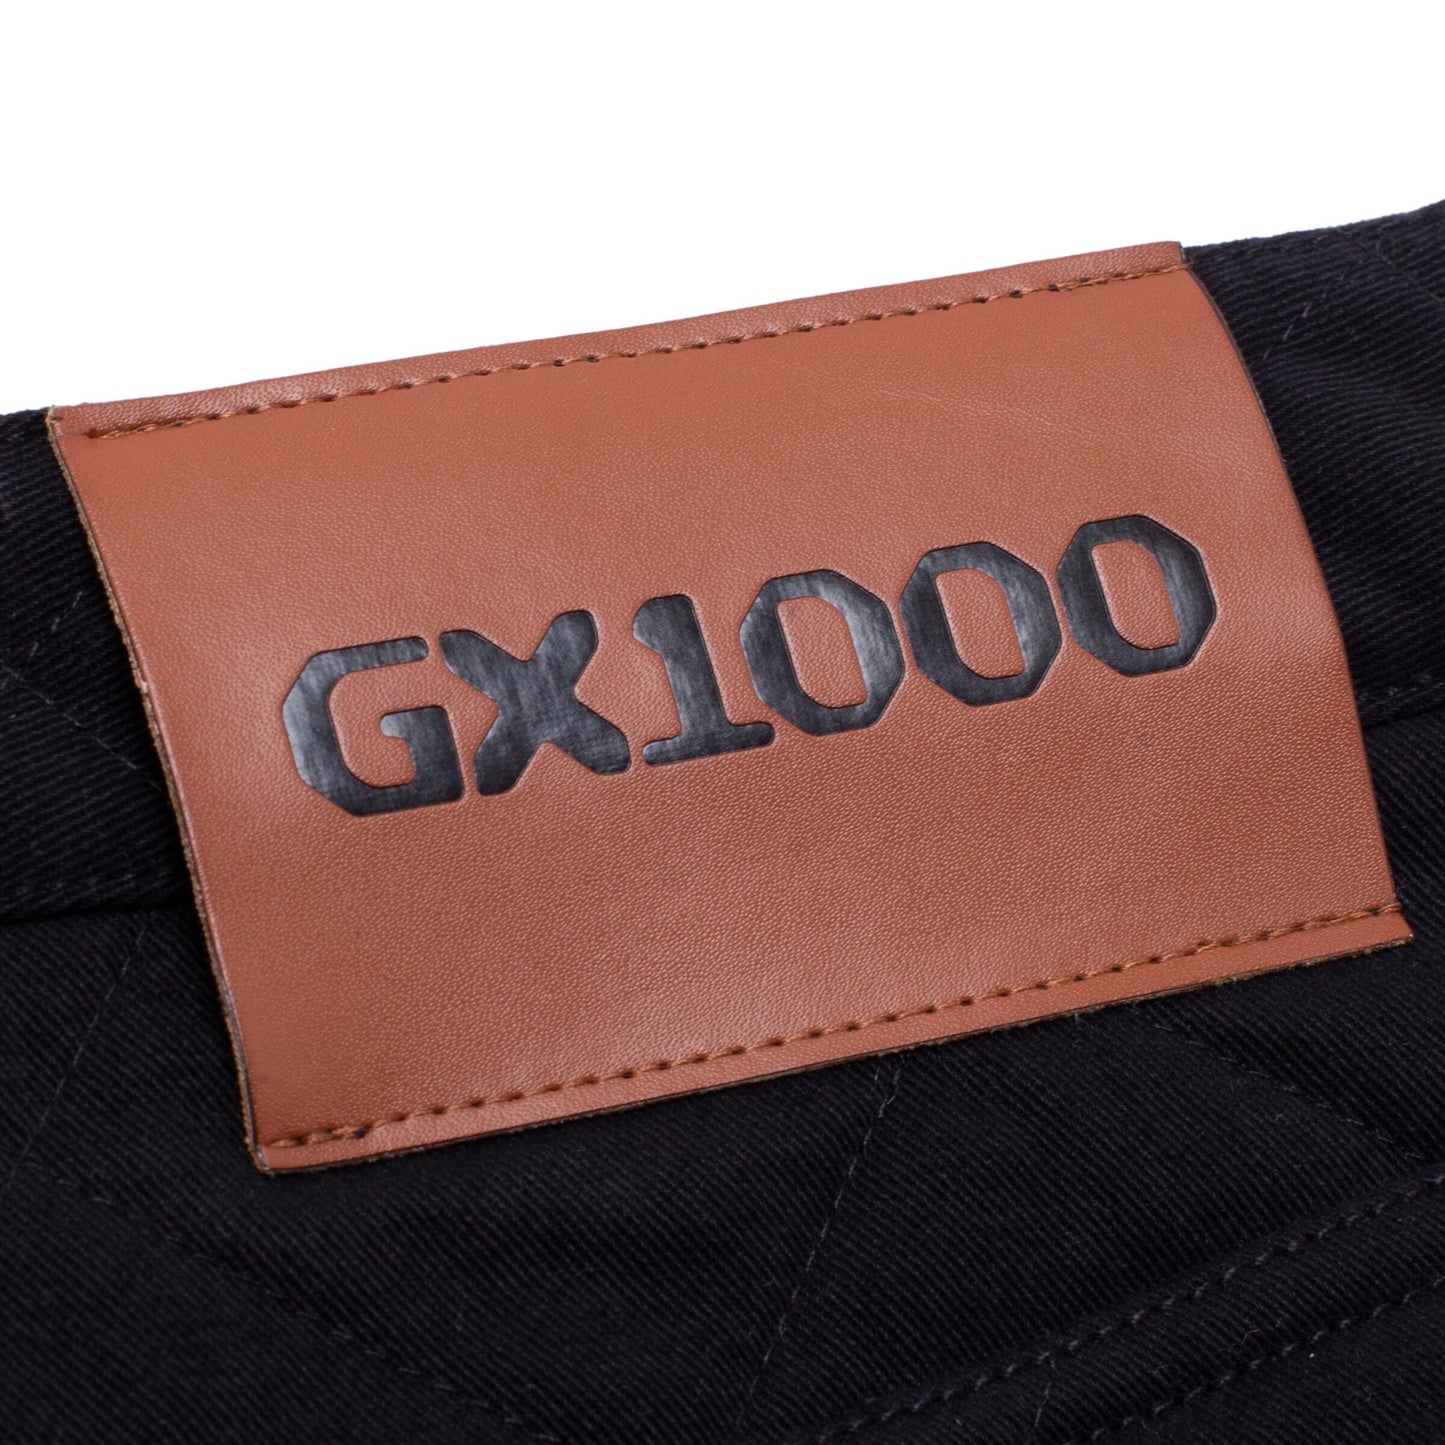 GX1000 Baggy Quilted Pant Twill Black